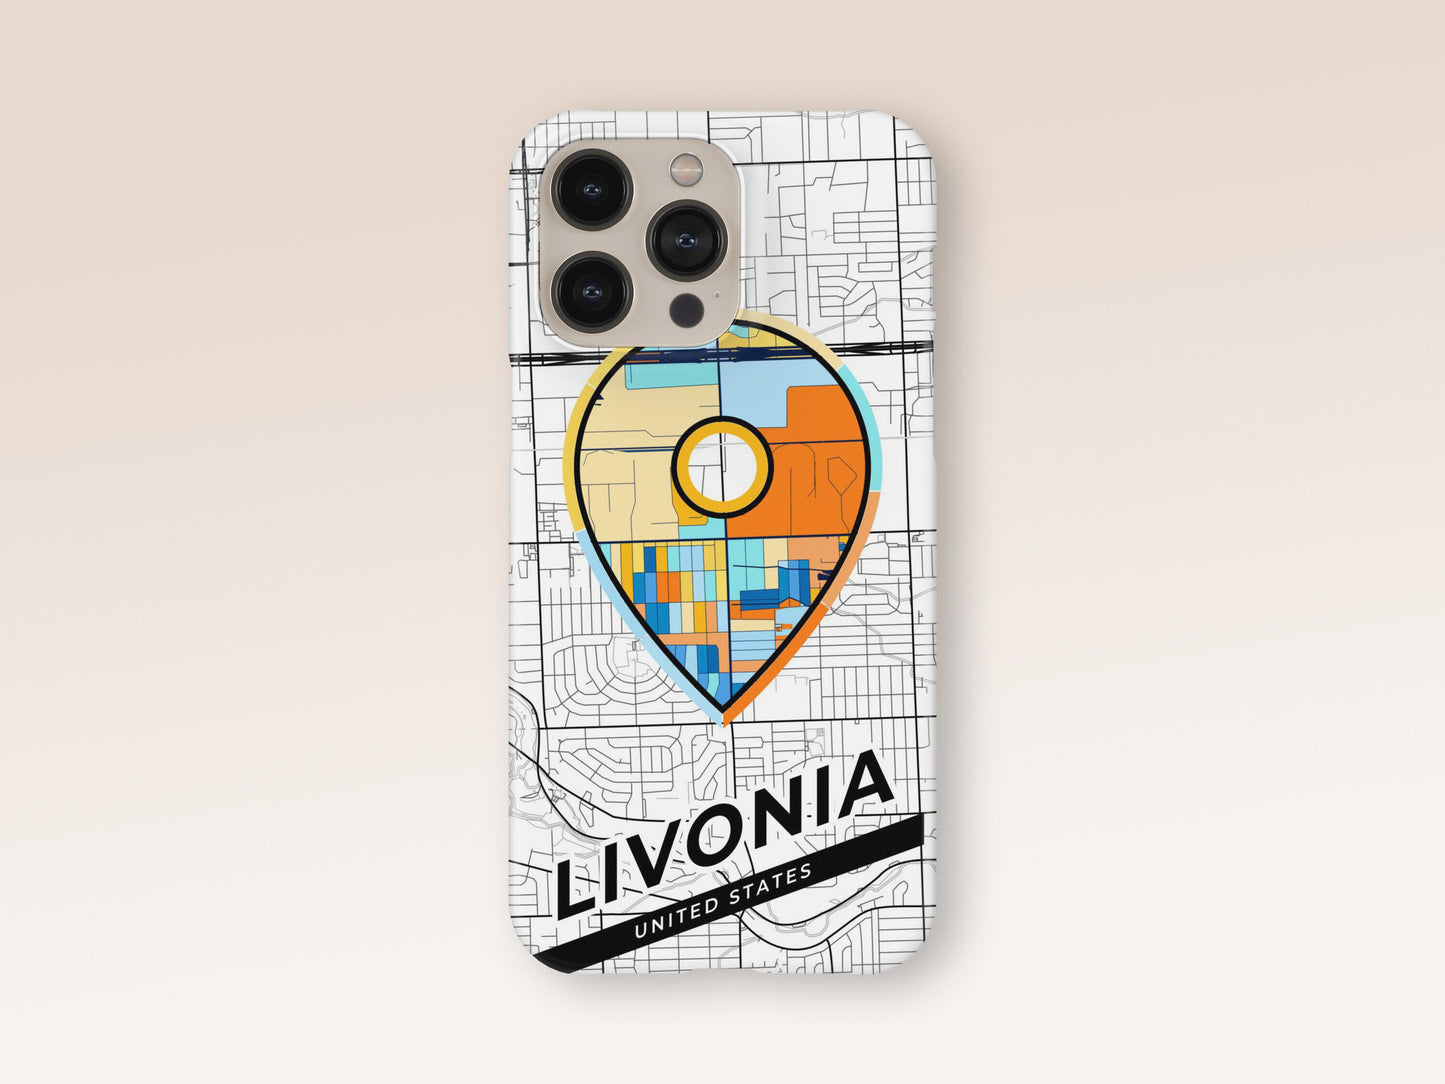 Livonia Michigan slim phone case with colorful icon. Birthday, wedding or housewarming gift. Couple match cases. 1